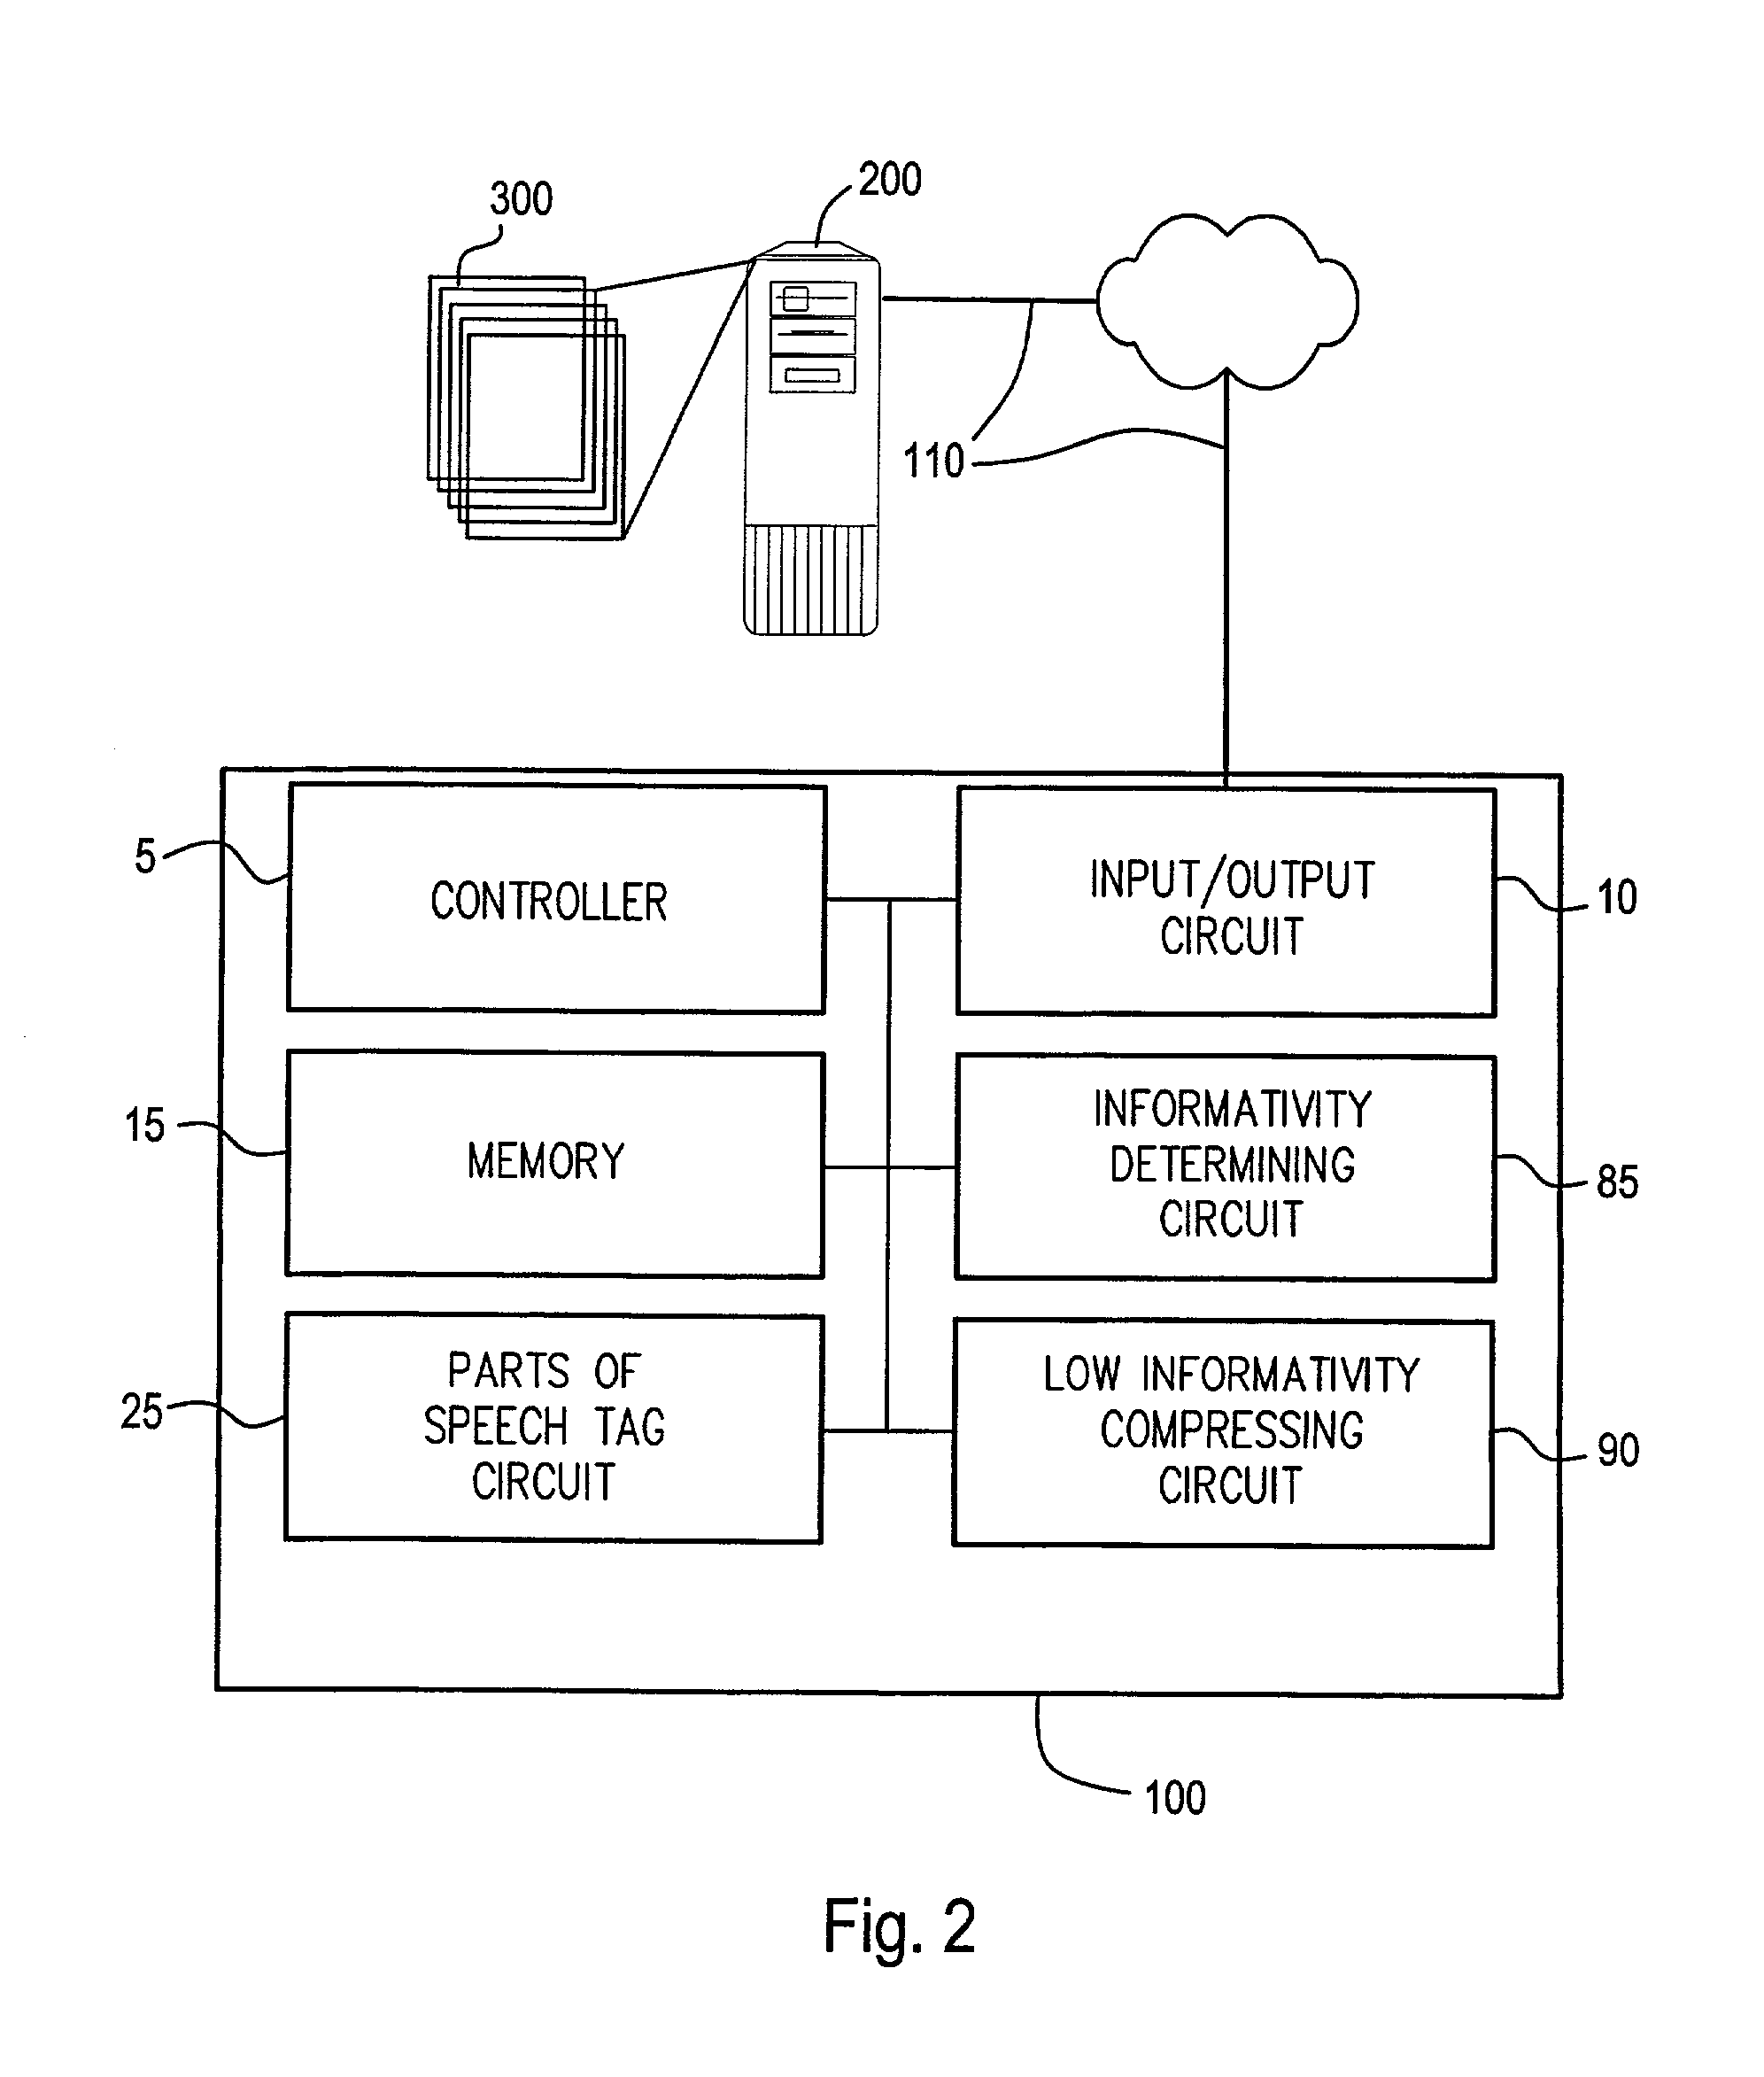 System and method for generating analytic summaries